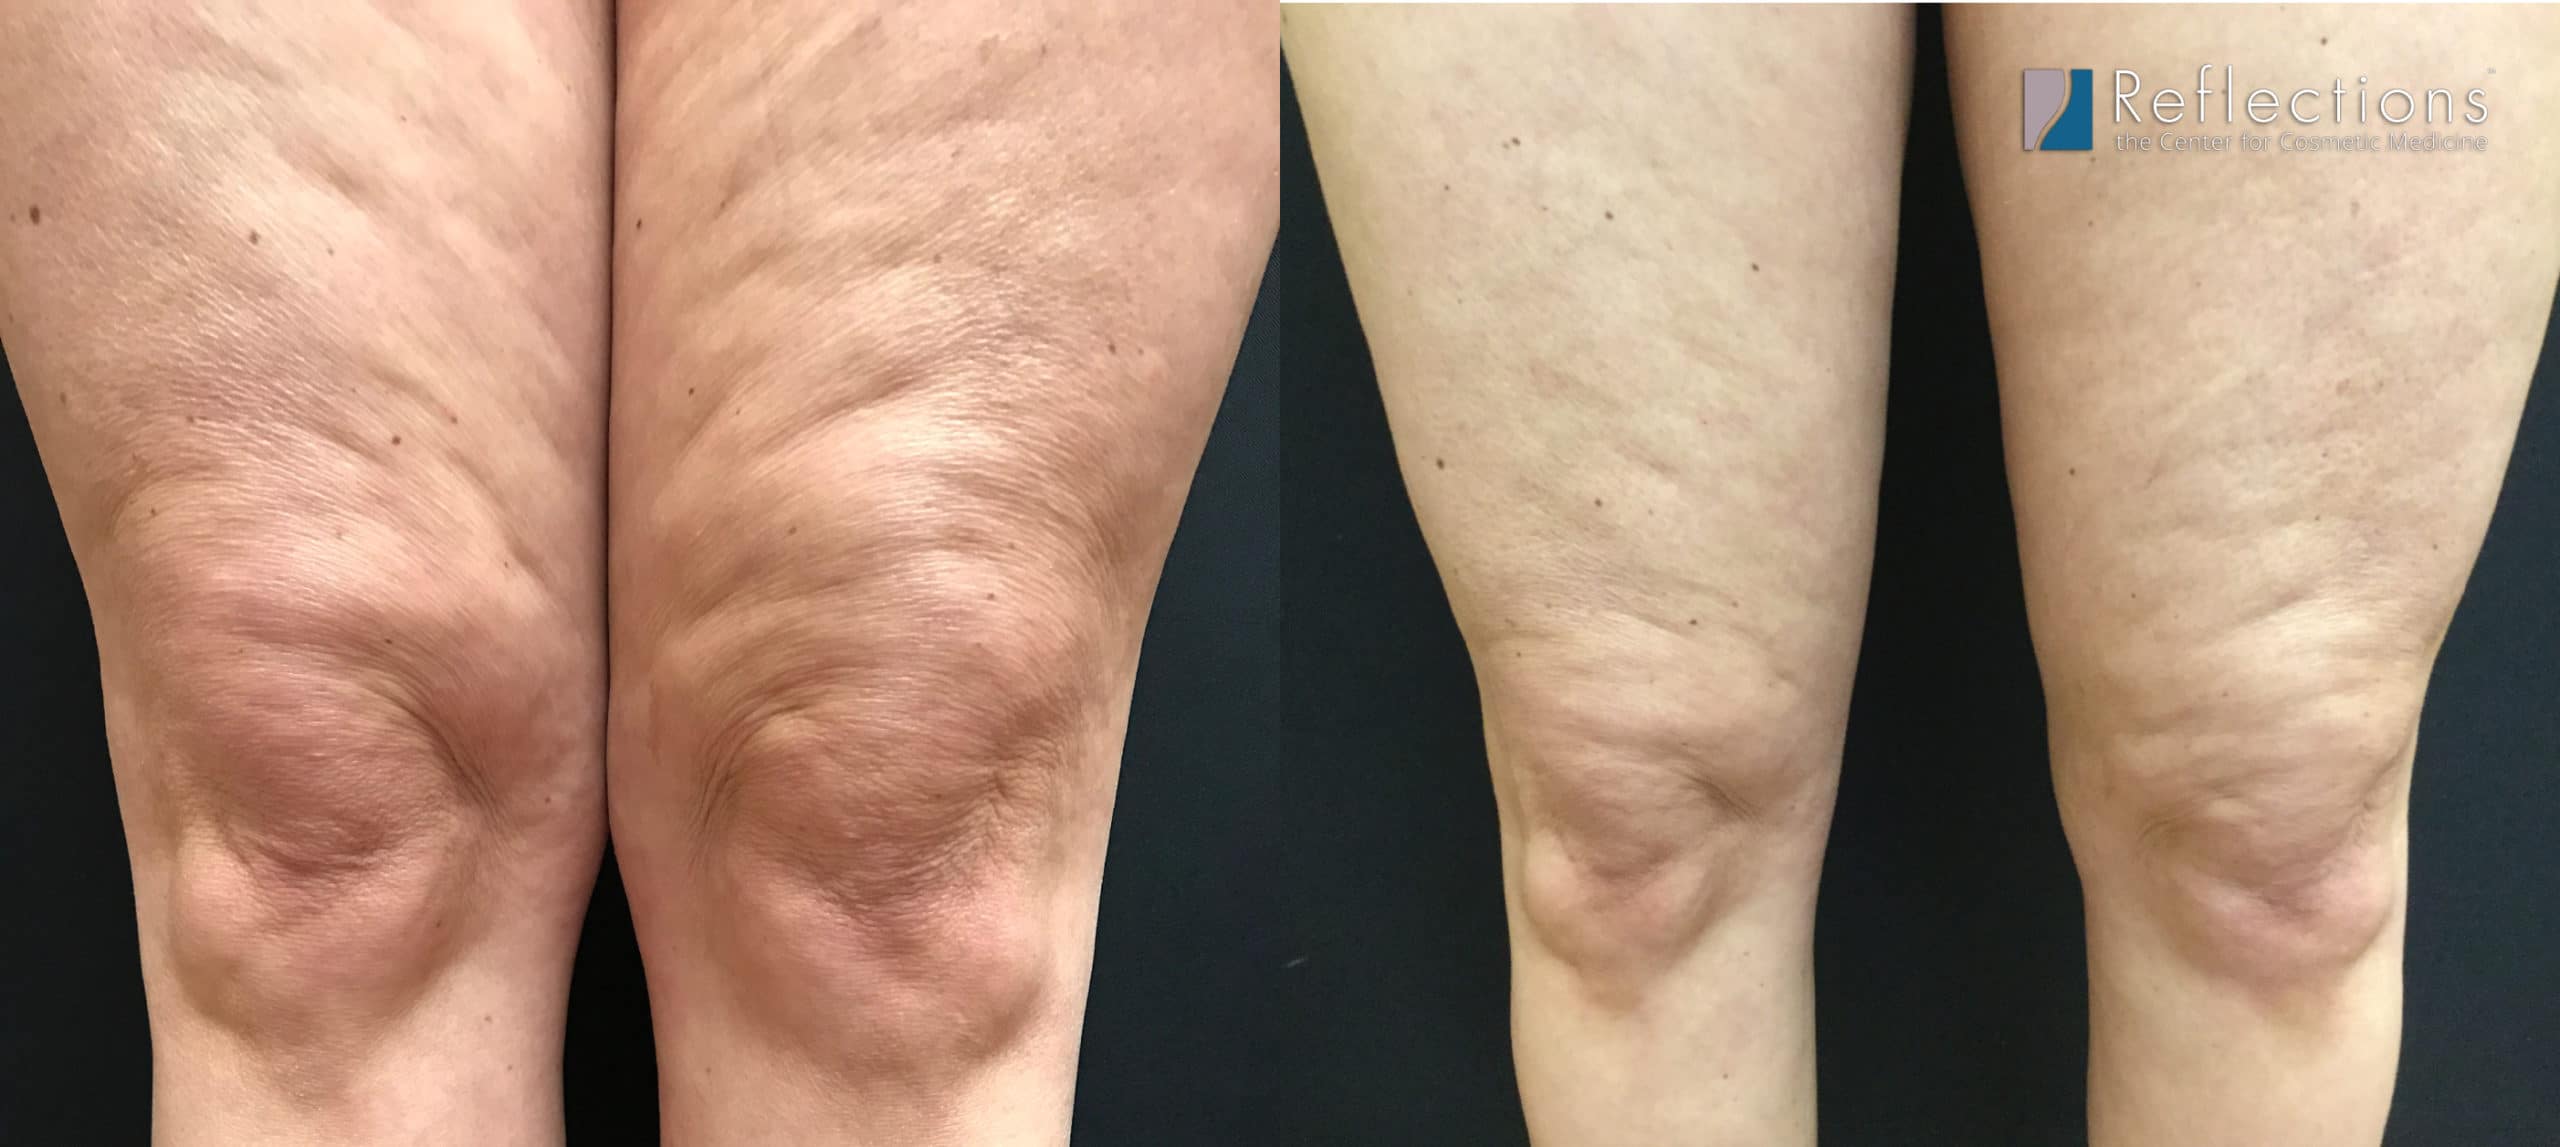 Thigh & Knee Liposuction procedure permanently removes fat